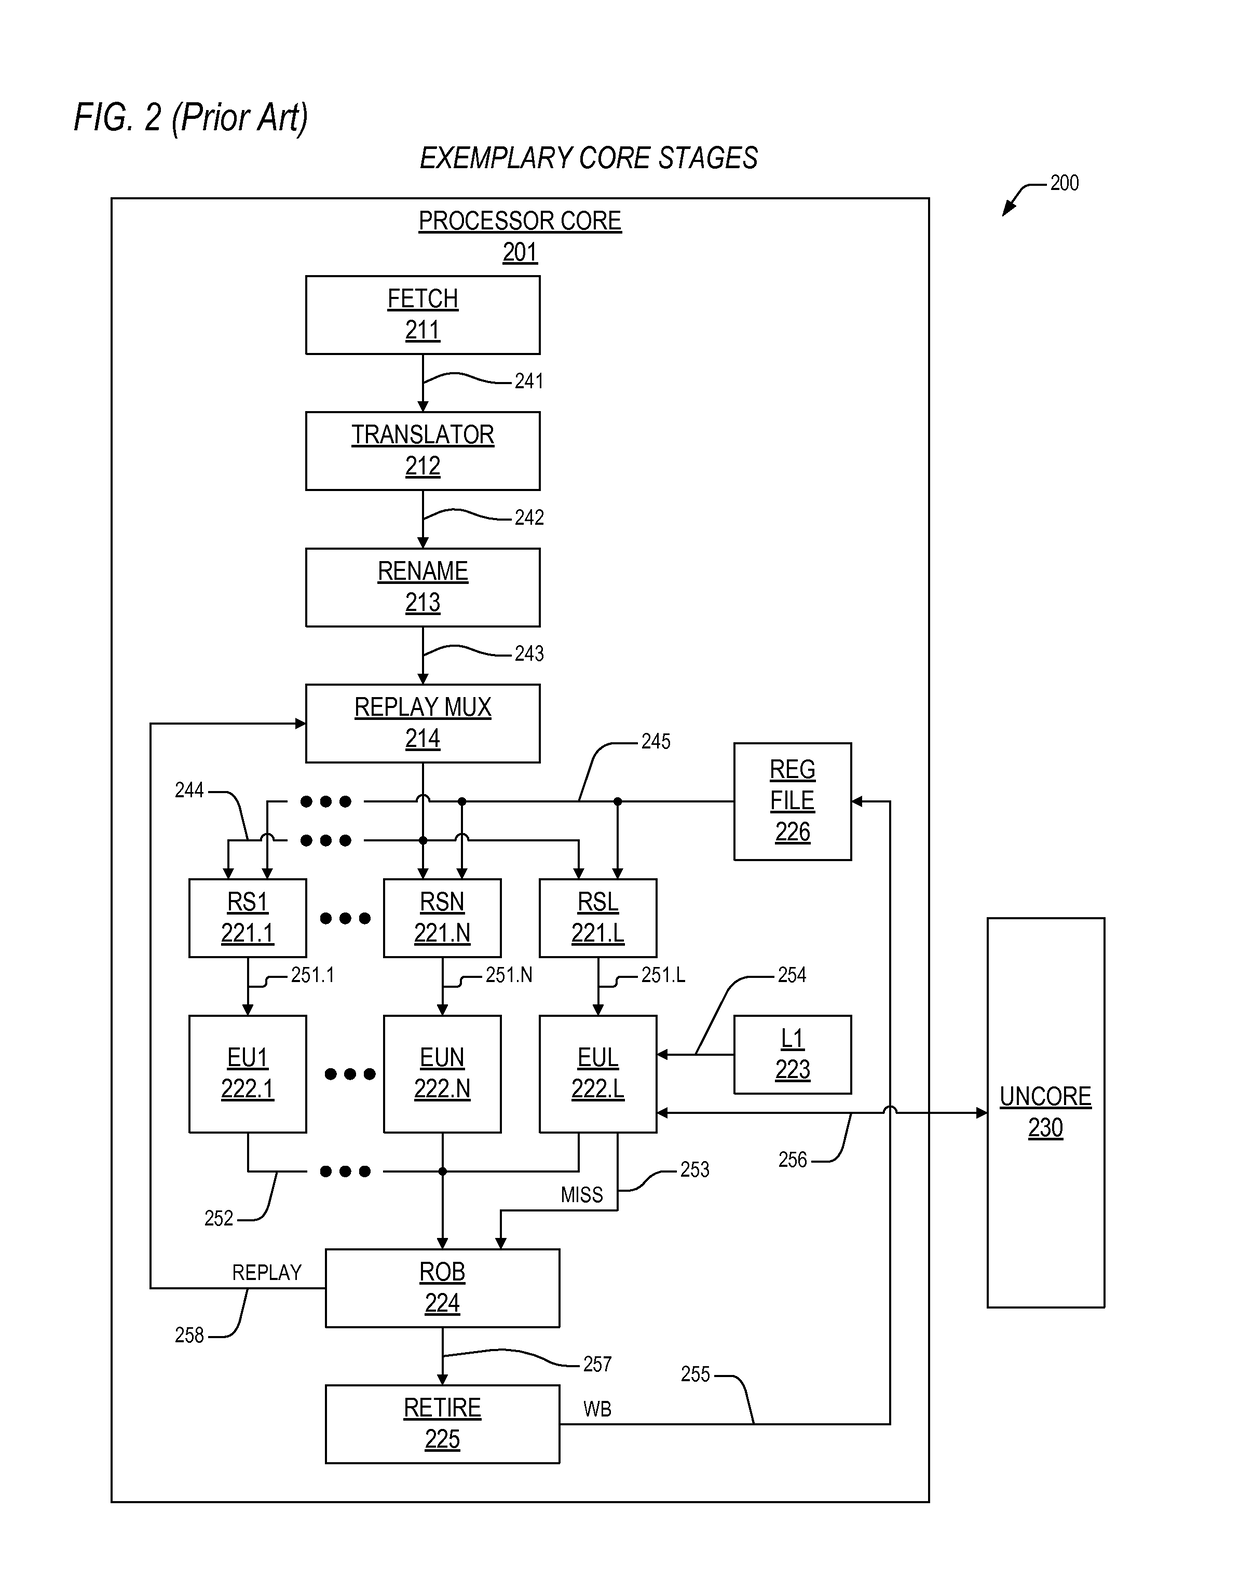 Mechanism to preclude I/O-dependent load replays in an out-of-order processor